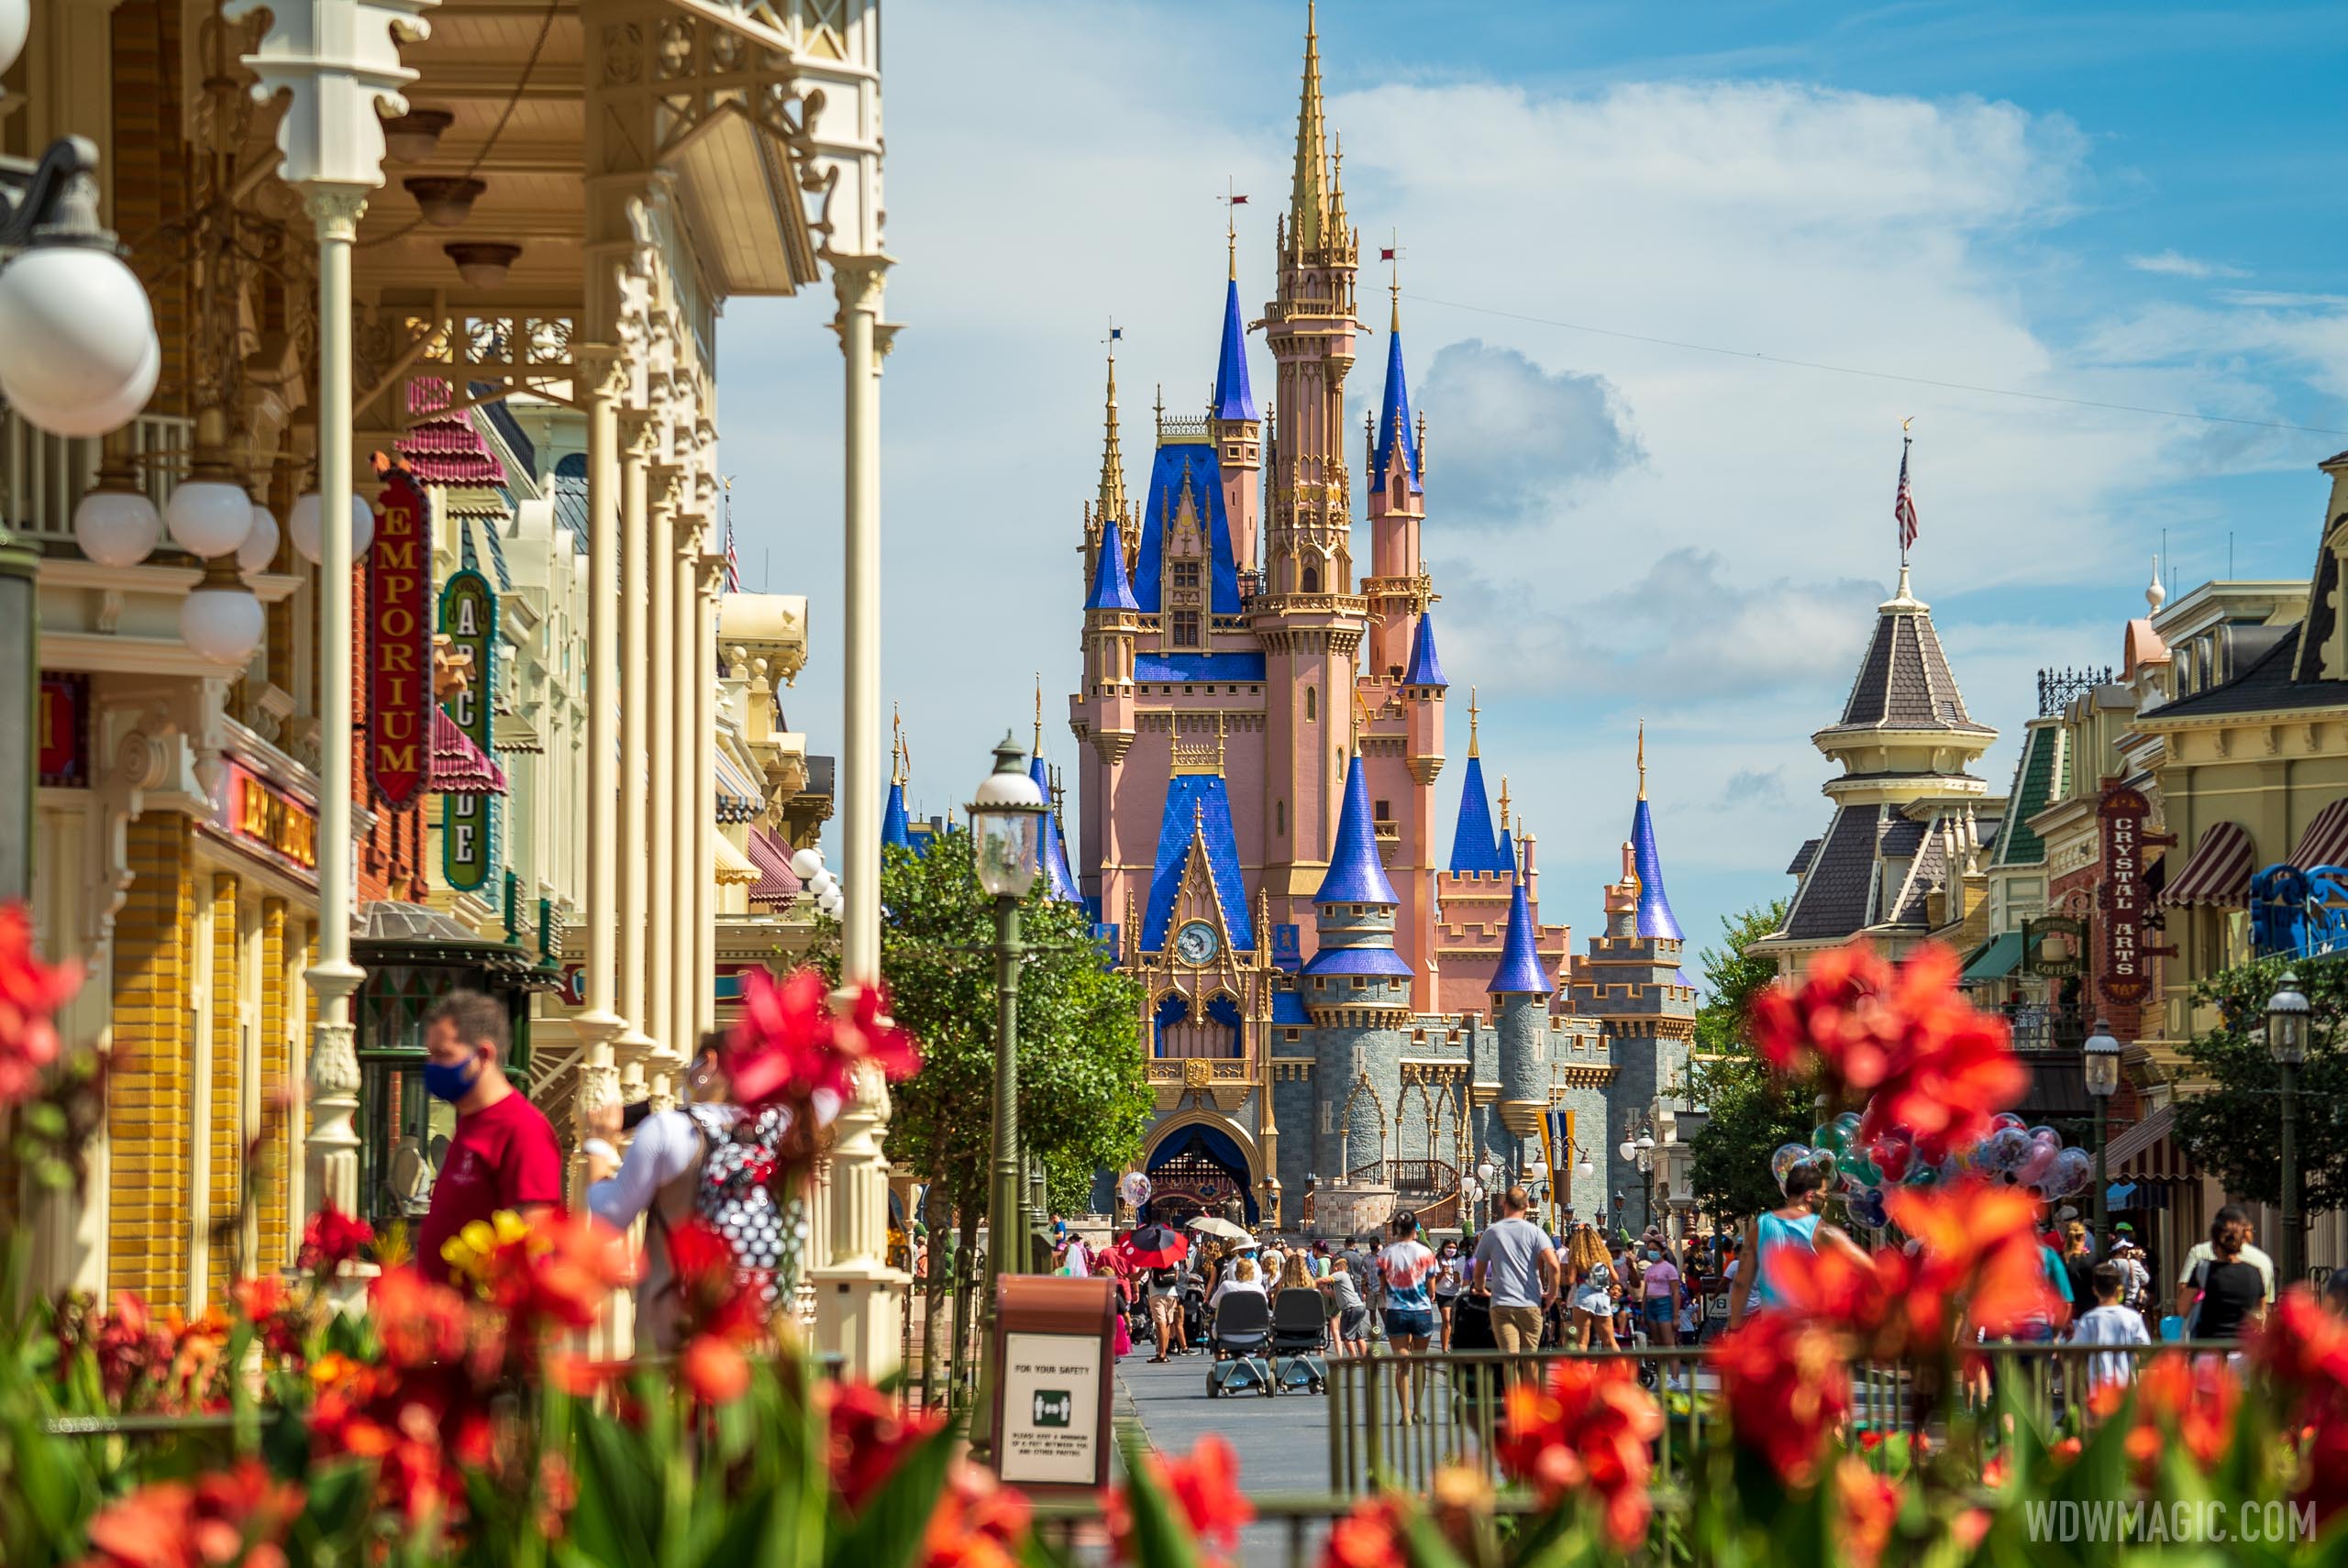 Disney has to annonce any plans to use vaccine passports at Walt Disney World